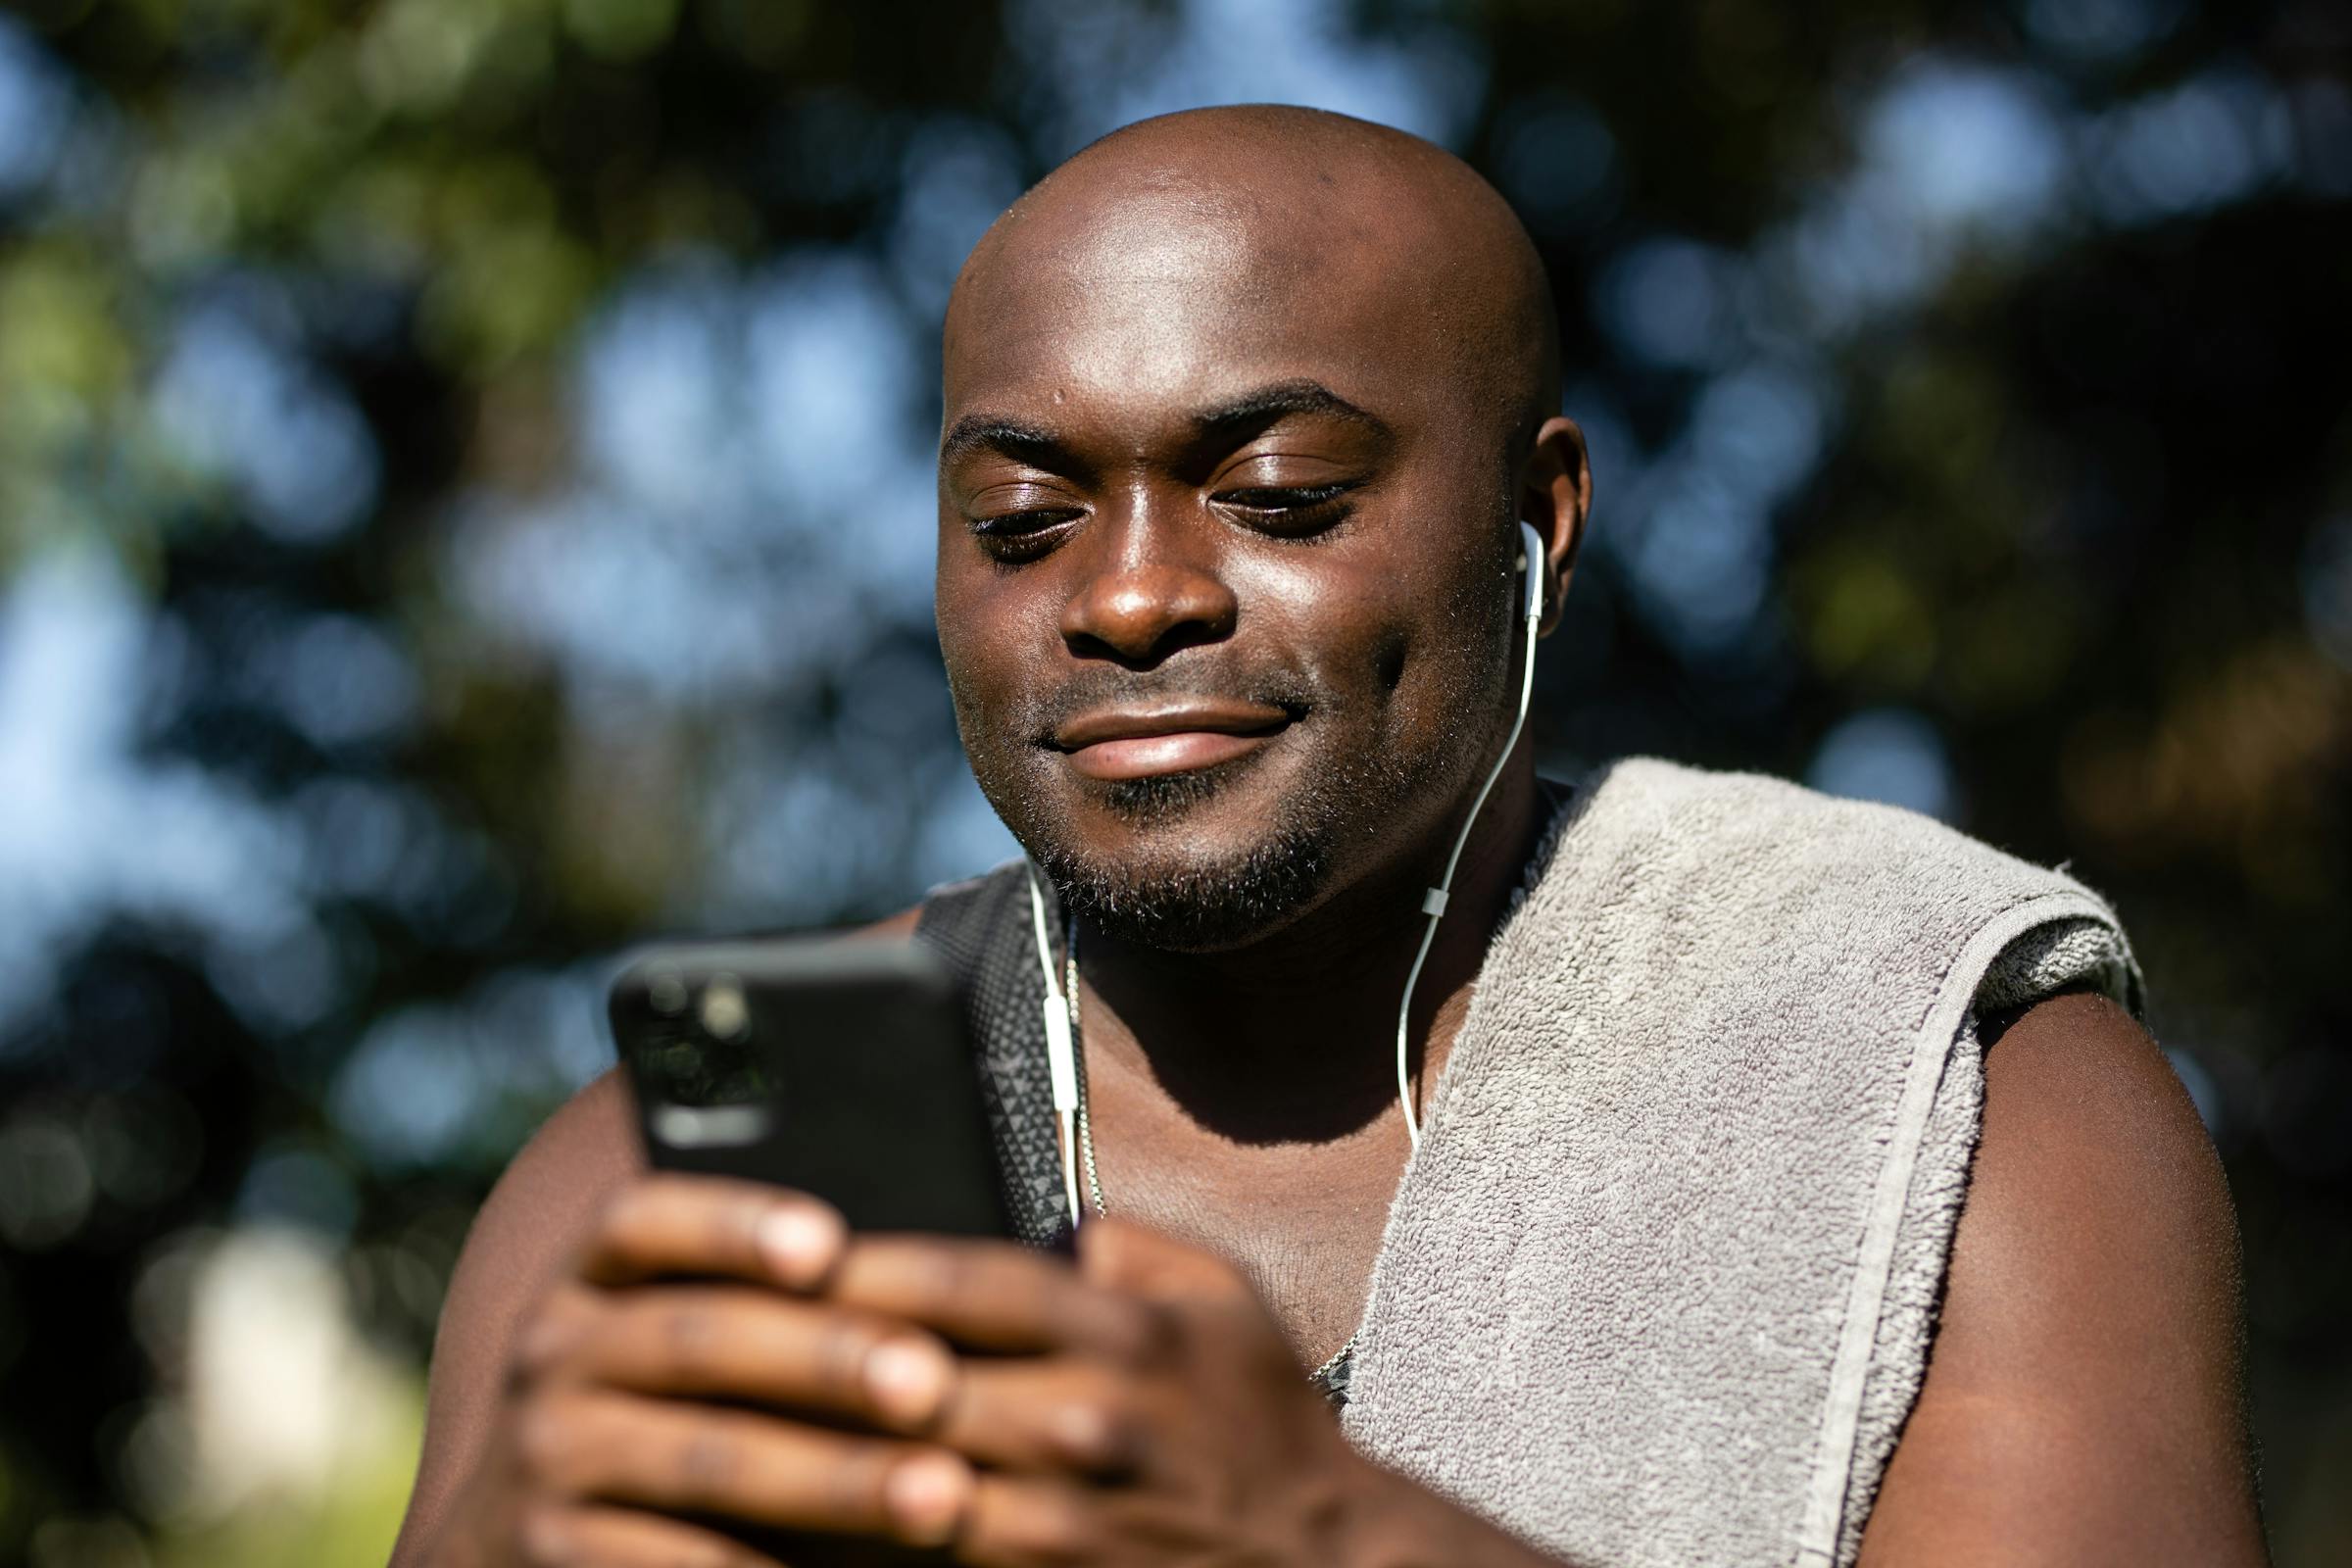 Close-up shot of a man listening to music while using a mobile phone.